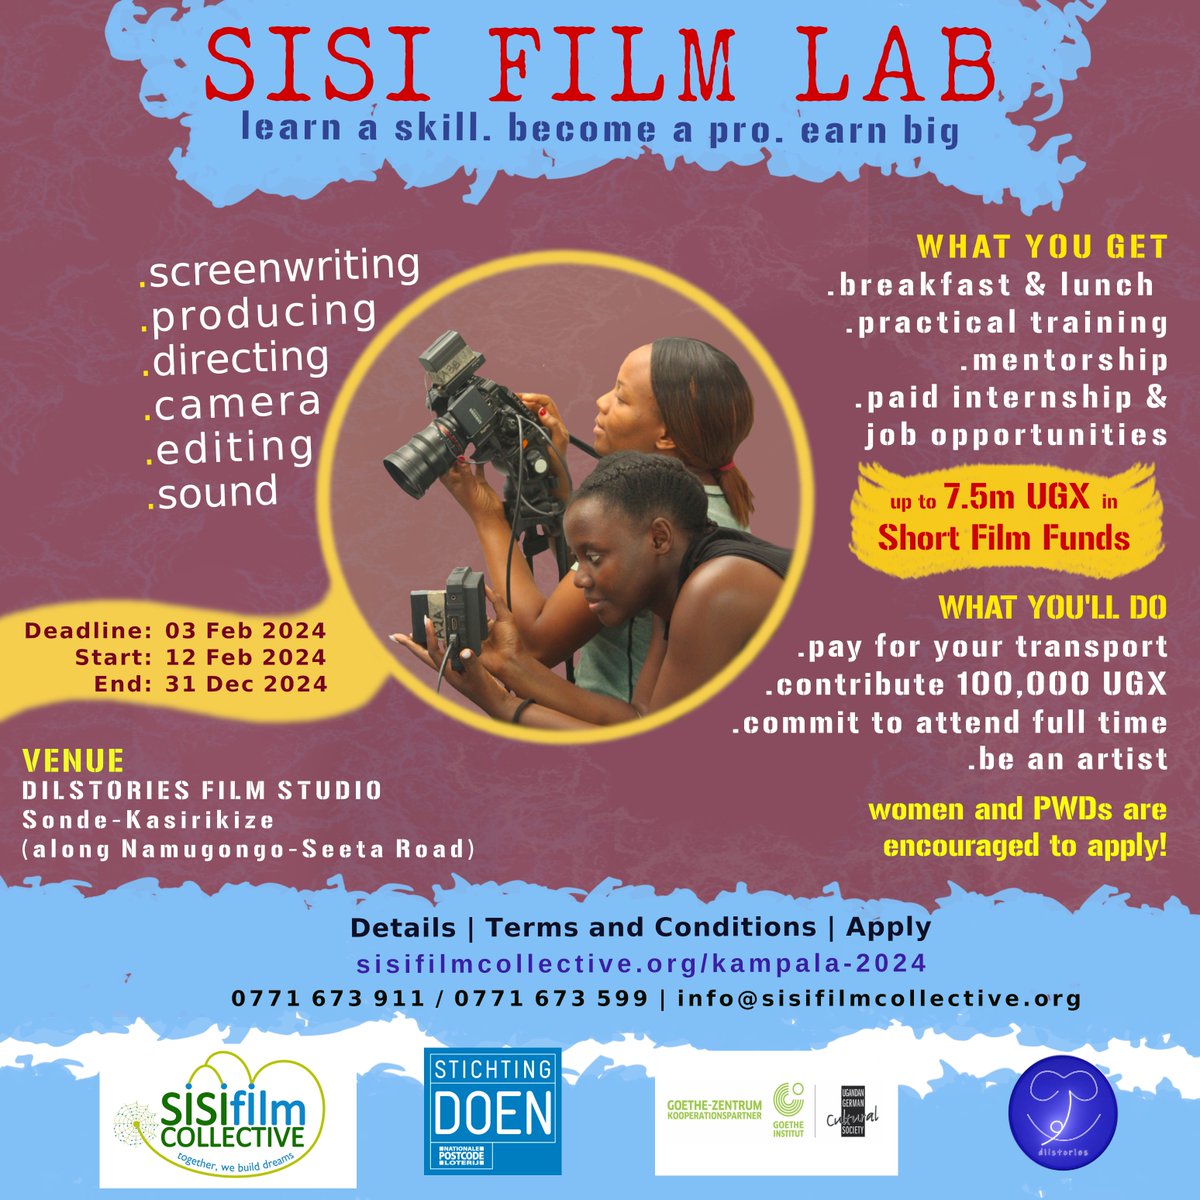 Want to make films? Sisi Film Lab is an intensive course designed to give you skills and techniques to excel as a filmmaker. Train on professional equipment, get paid intership opportunities, and funds for short films. For details, please visit sisifilmcollective.org/kampala-2024/